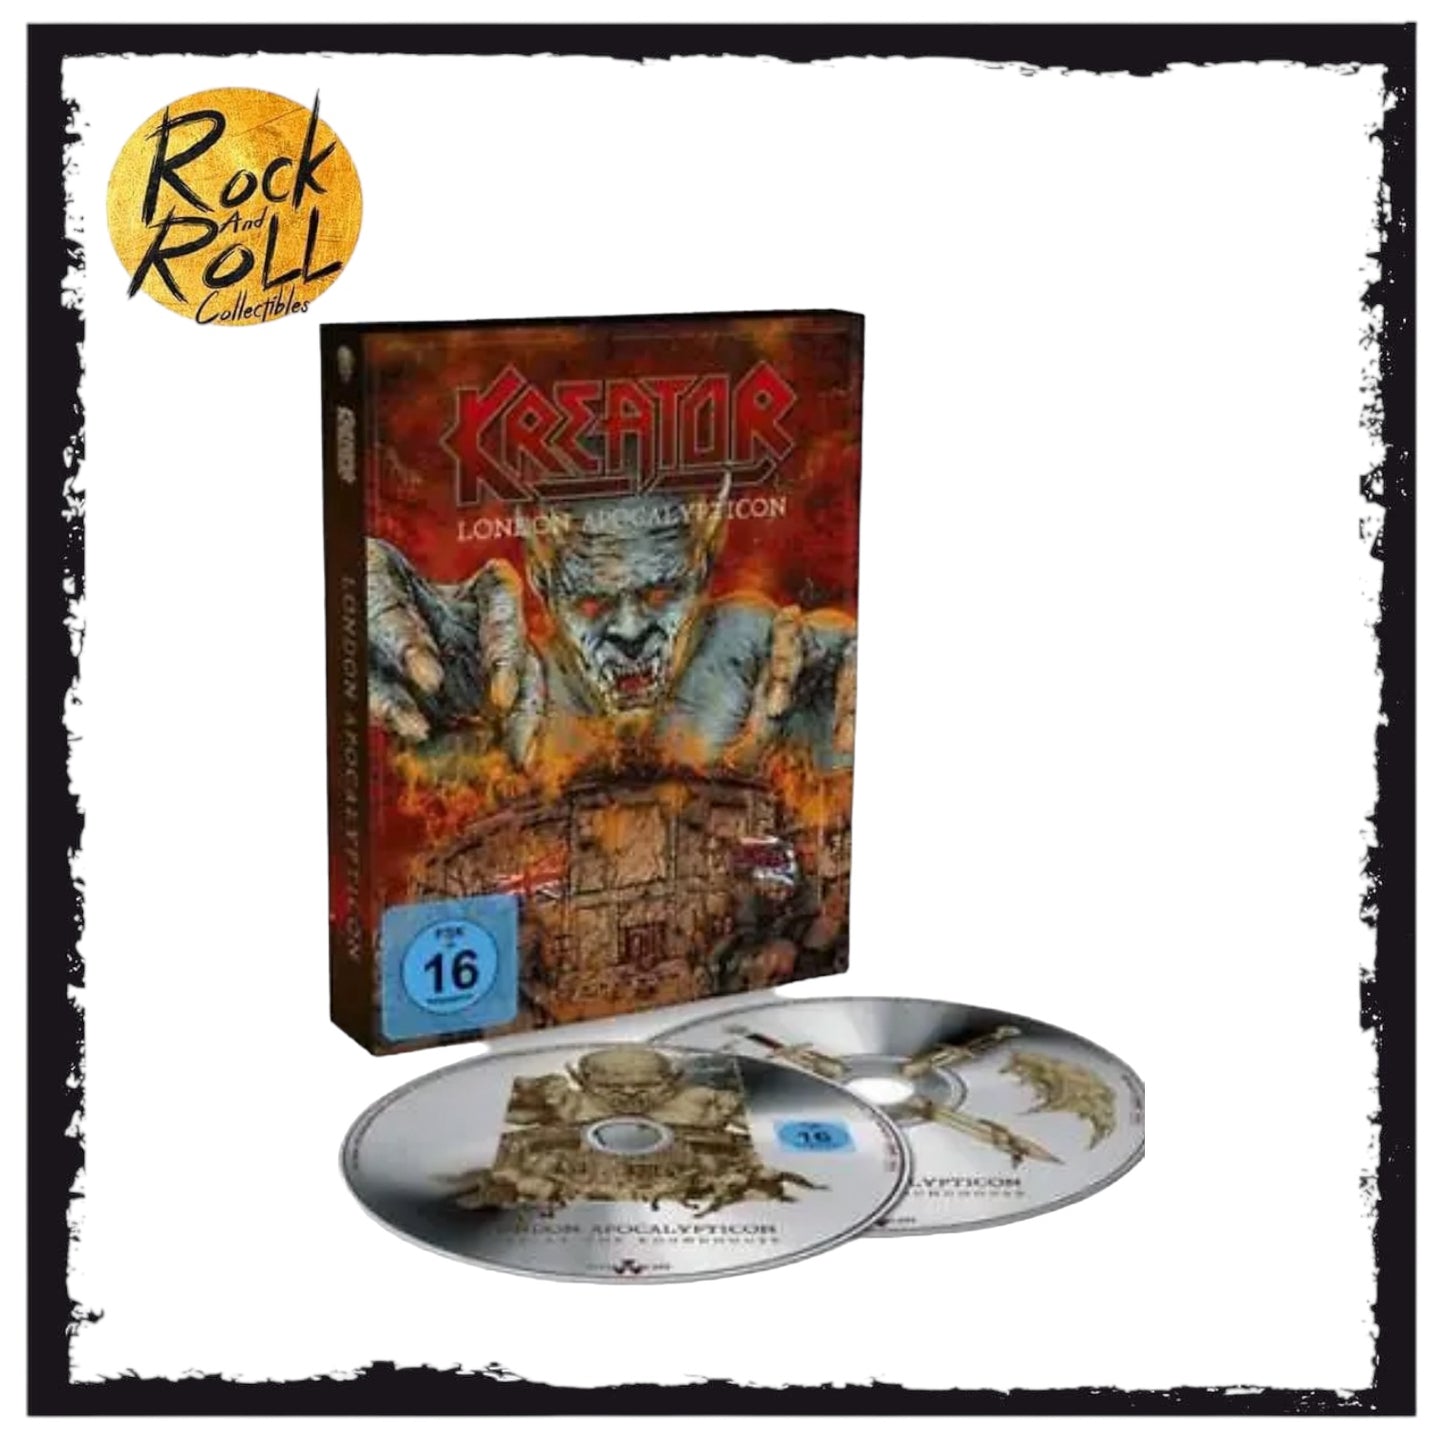 Kreator London Apocalypticon: Live at the Roundhouse (CD) Box Set with Blu-ray